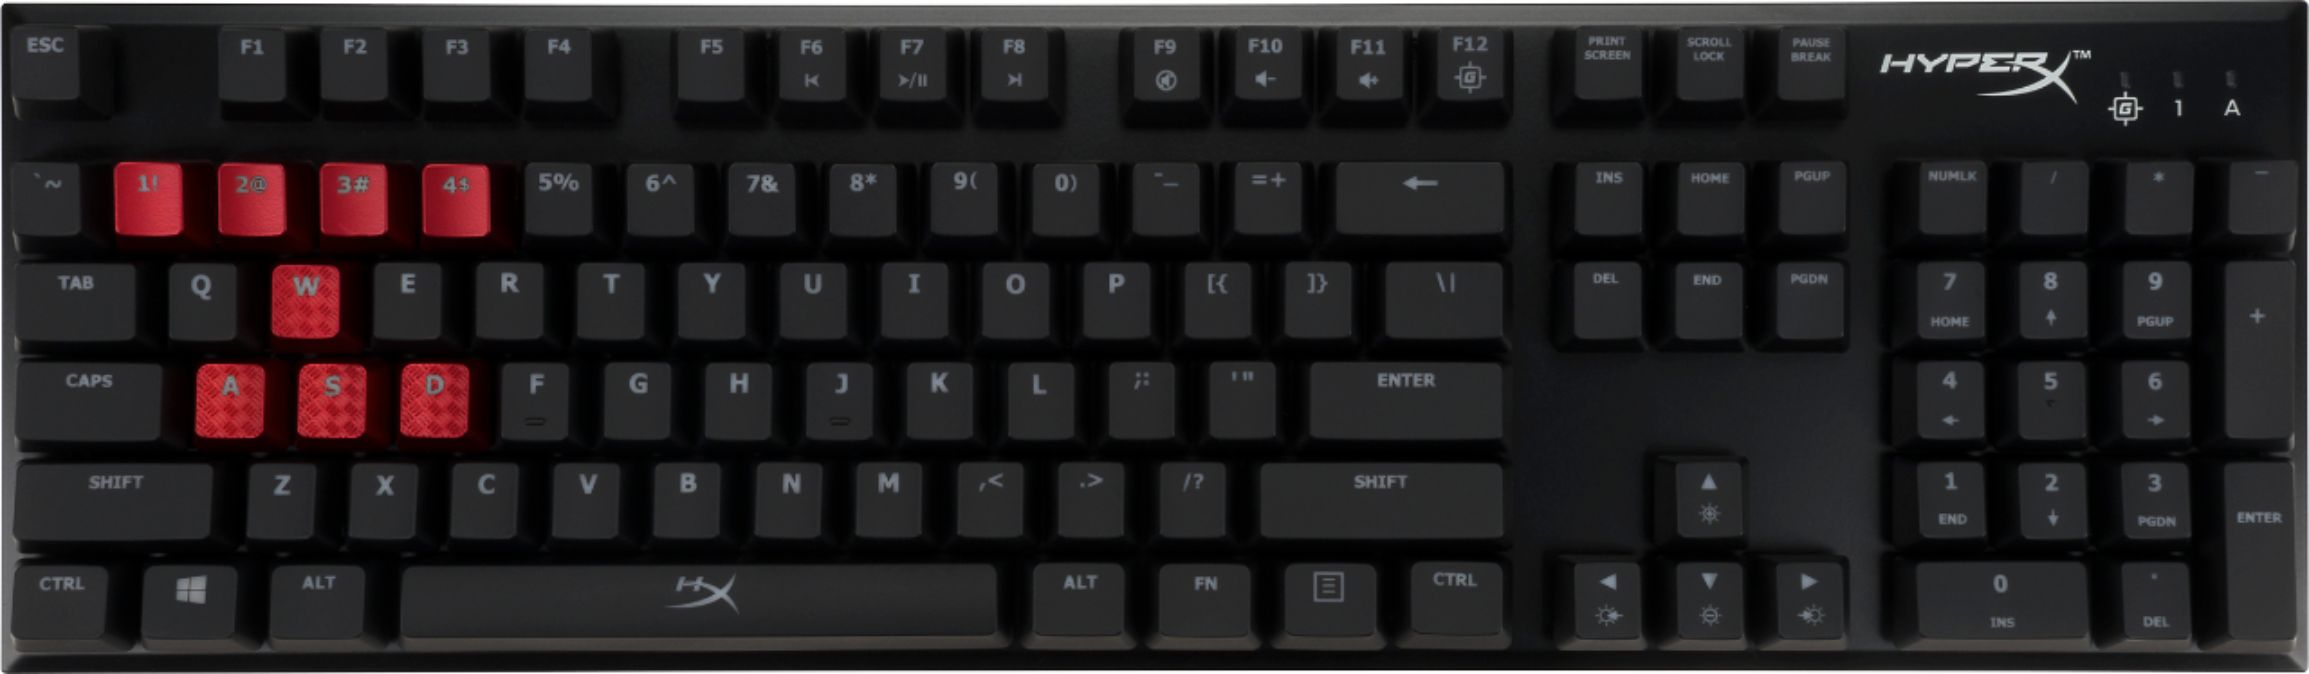 Best Buy: HyperX Alloy FPS Wired Gaming Mechanical Cherry MX Blue Switch  Keyboard with Backlighting Black/Red HX-KB1BL1-NA/A1